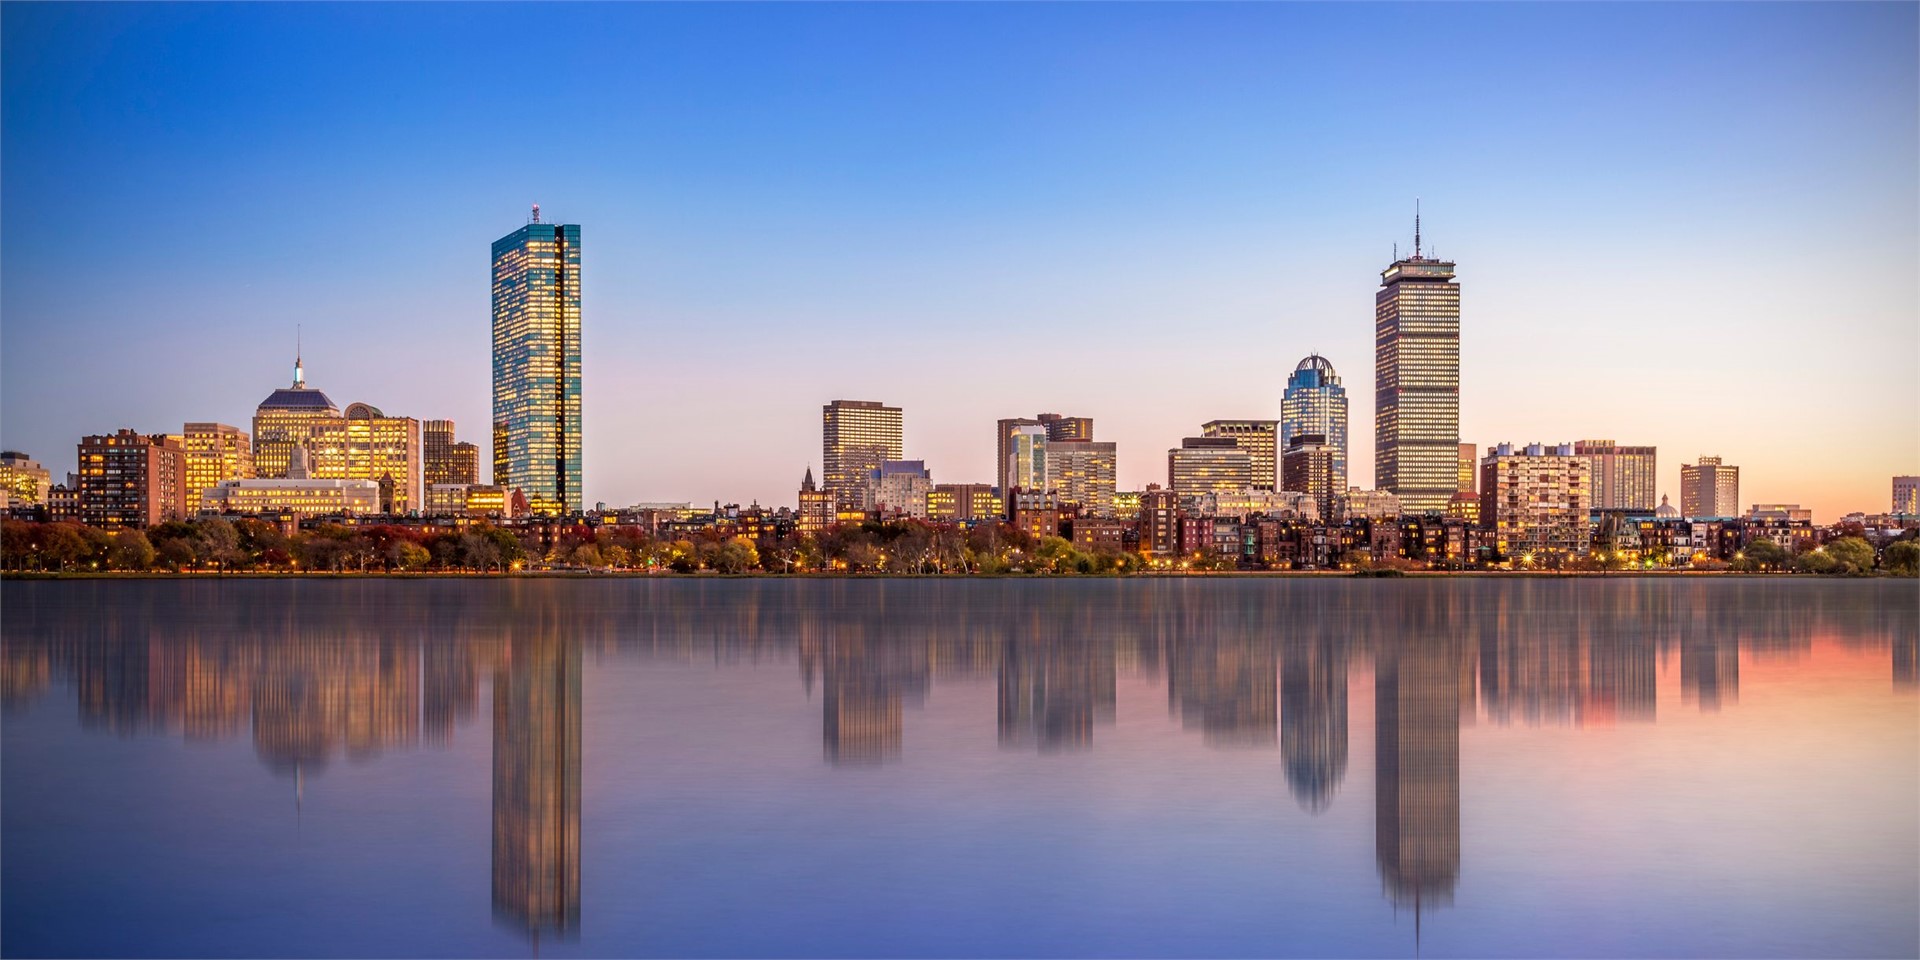 Hotels and accommodation in Boston, USA